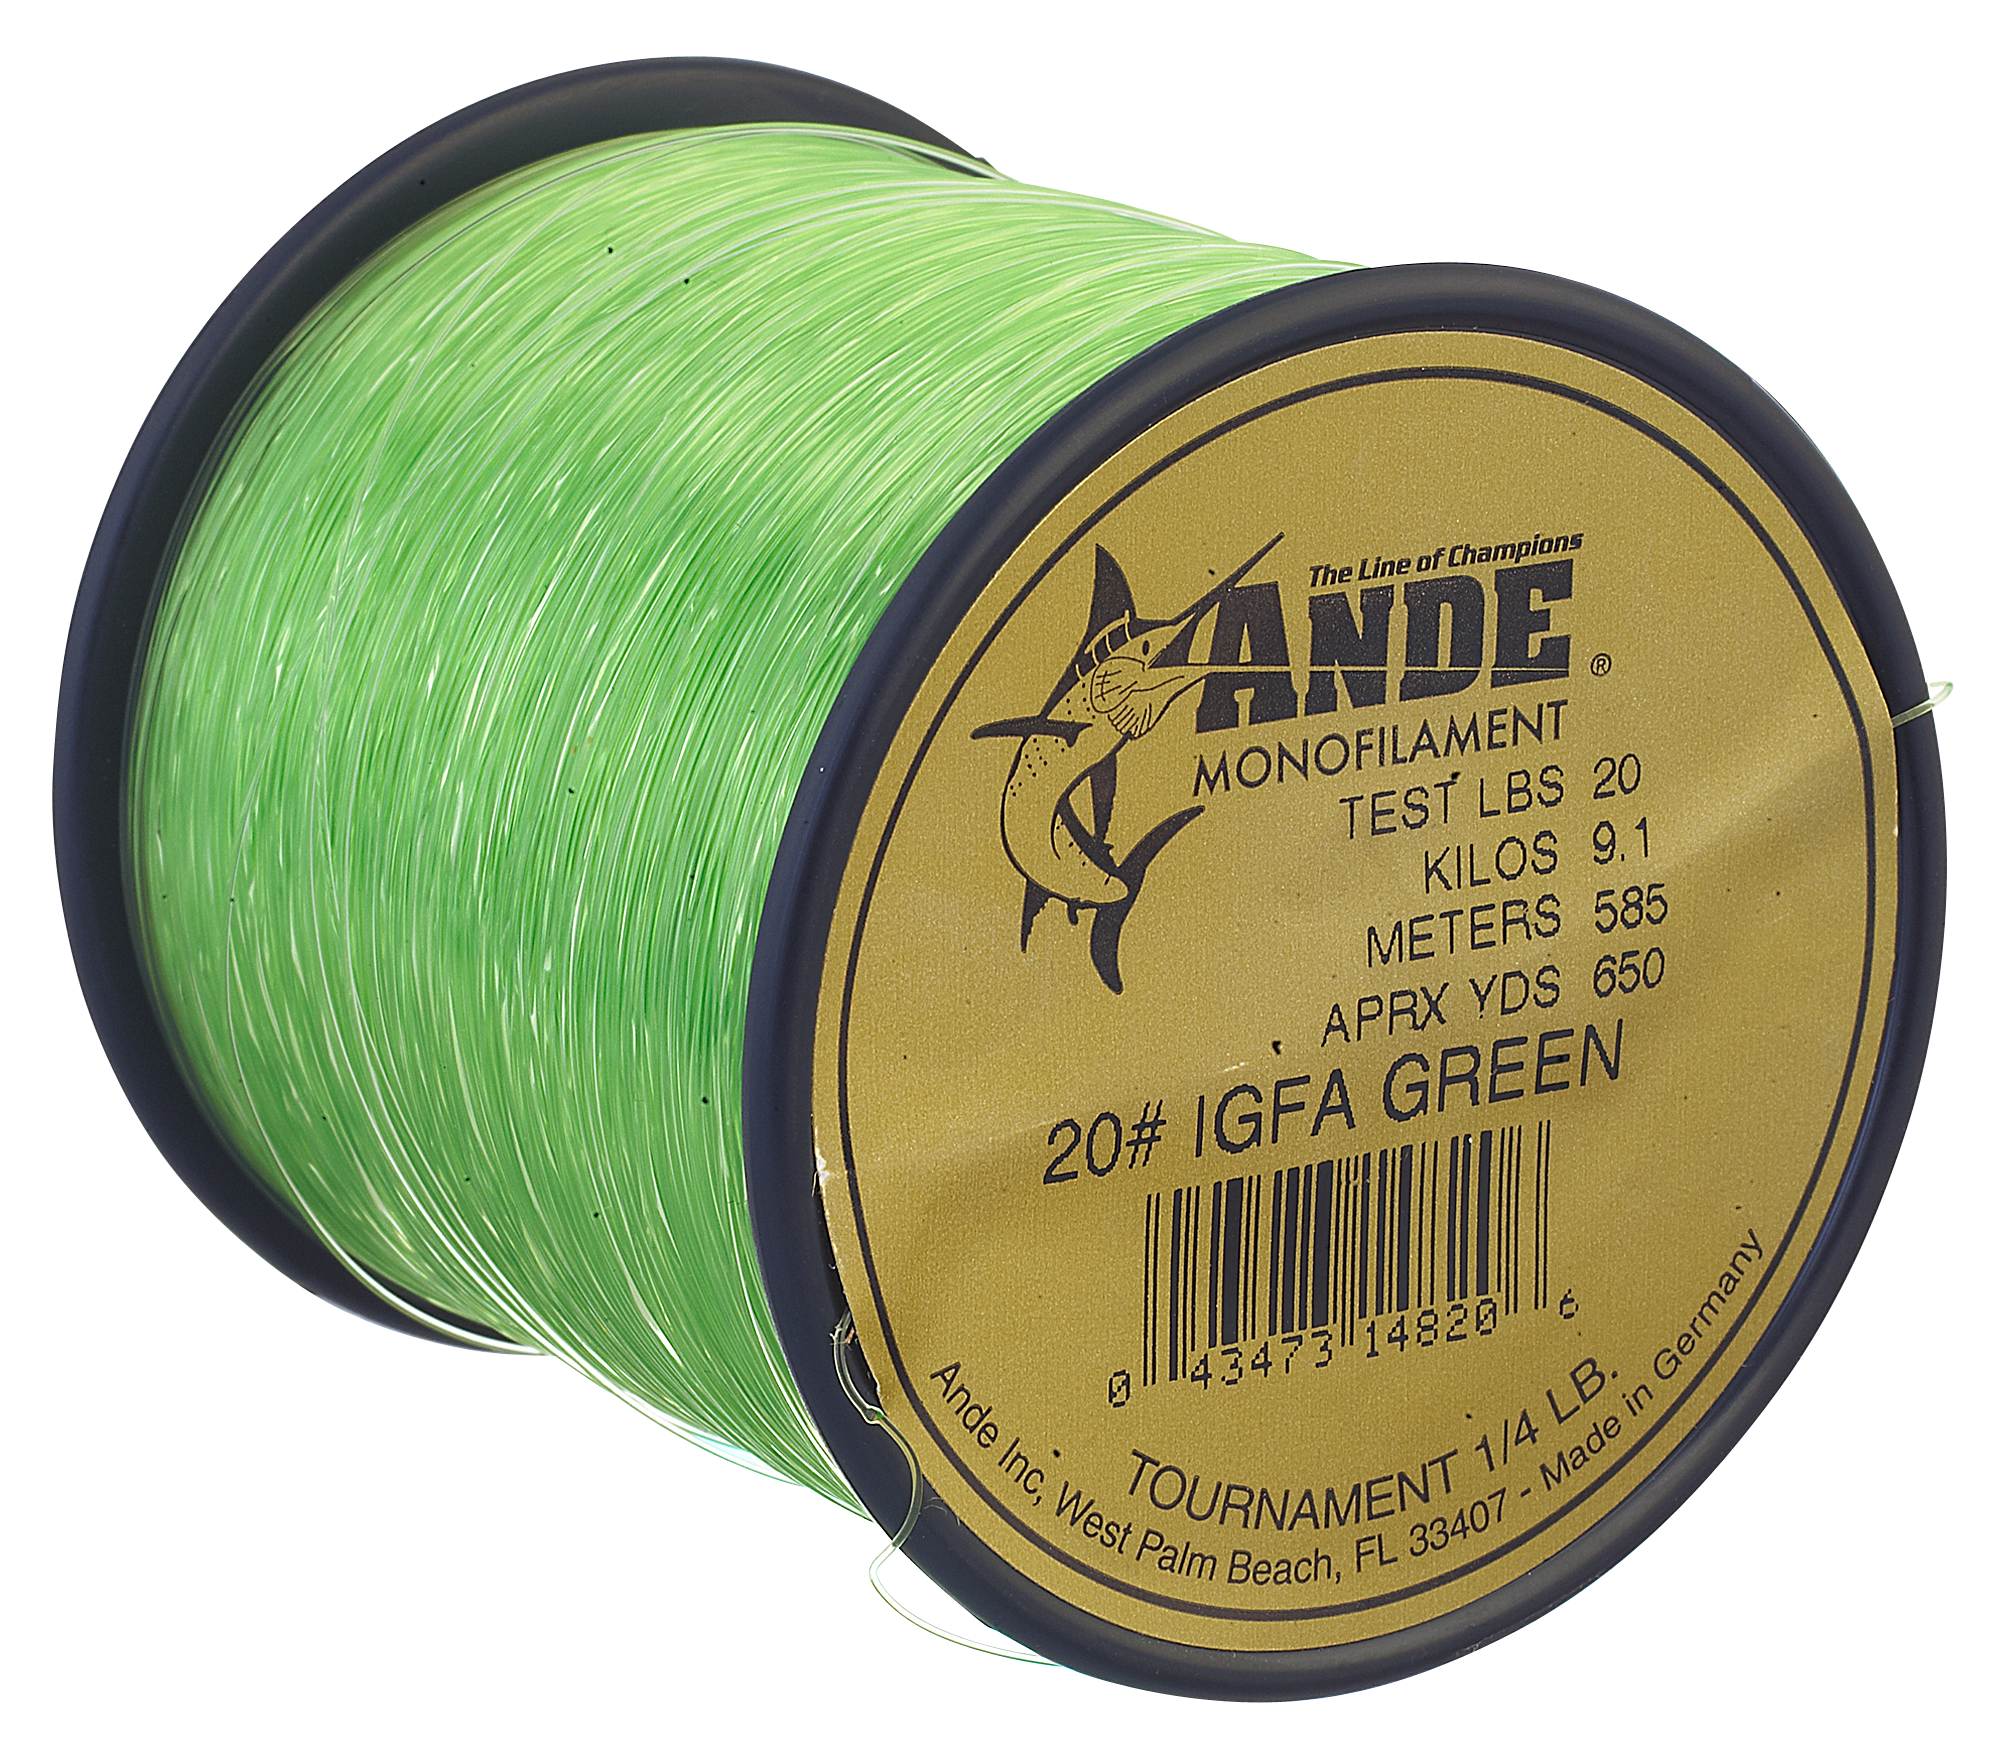 Ande Monofilament Line (Clear, 40 -Pounds Test, 1/4# Spool